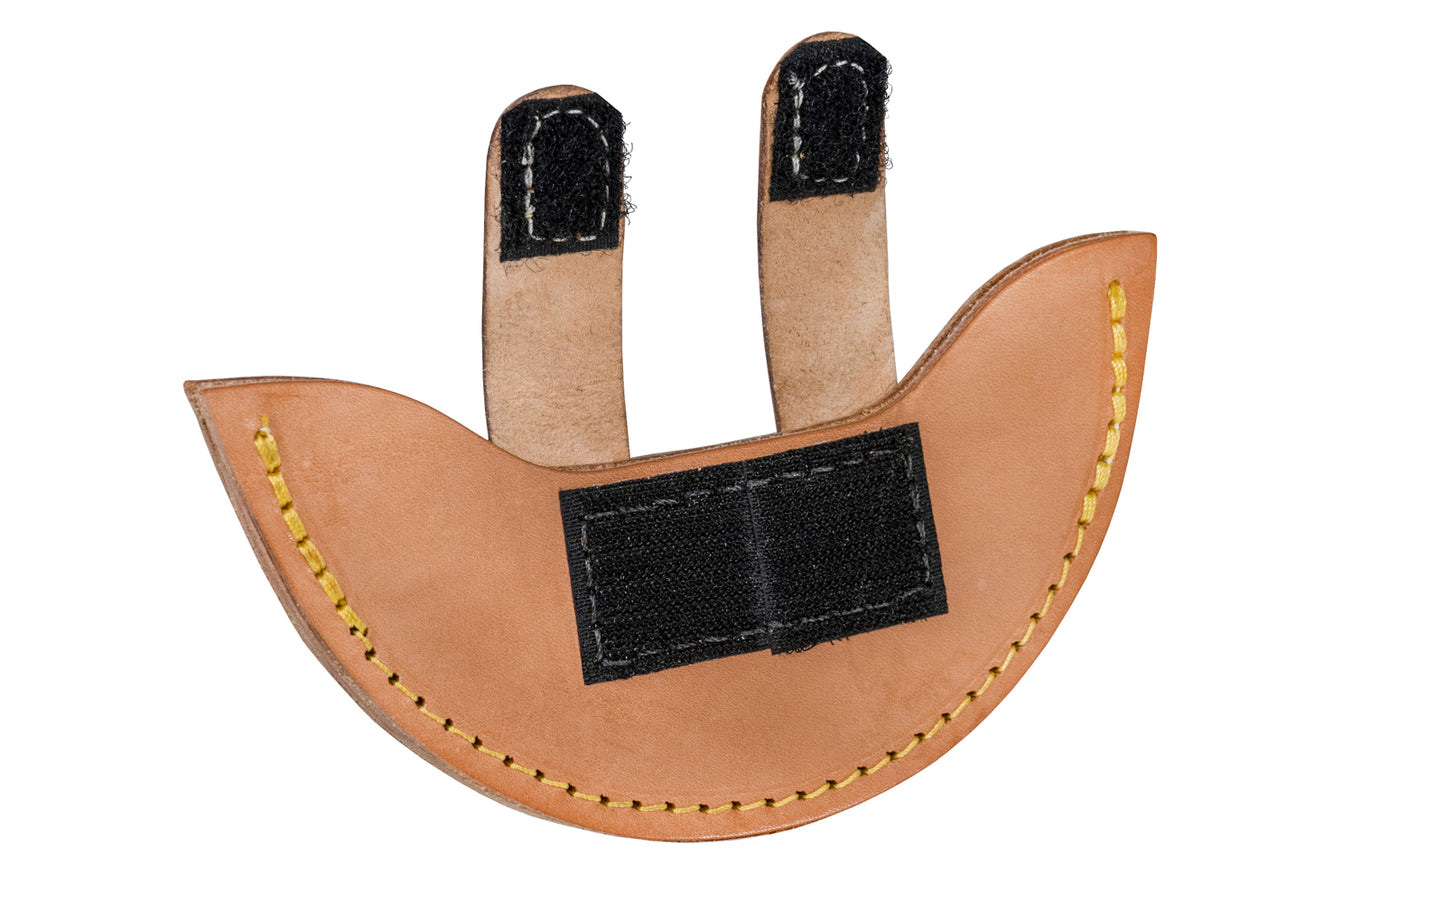 Made in USA · CS Osborne - A quality USA-made leather sheath made by C.S. Osborne for round blade knives. Round Knife sheath - All leather construction with stitched edges & velcro fastener. Made in the USA. Model No. 75.  4-13/16" overall length - Velco Strap - Riveted. Round Blade Sheath - Hand Made Leather Sheath